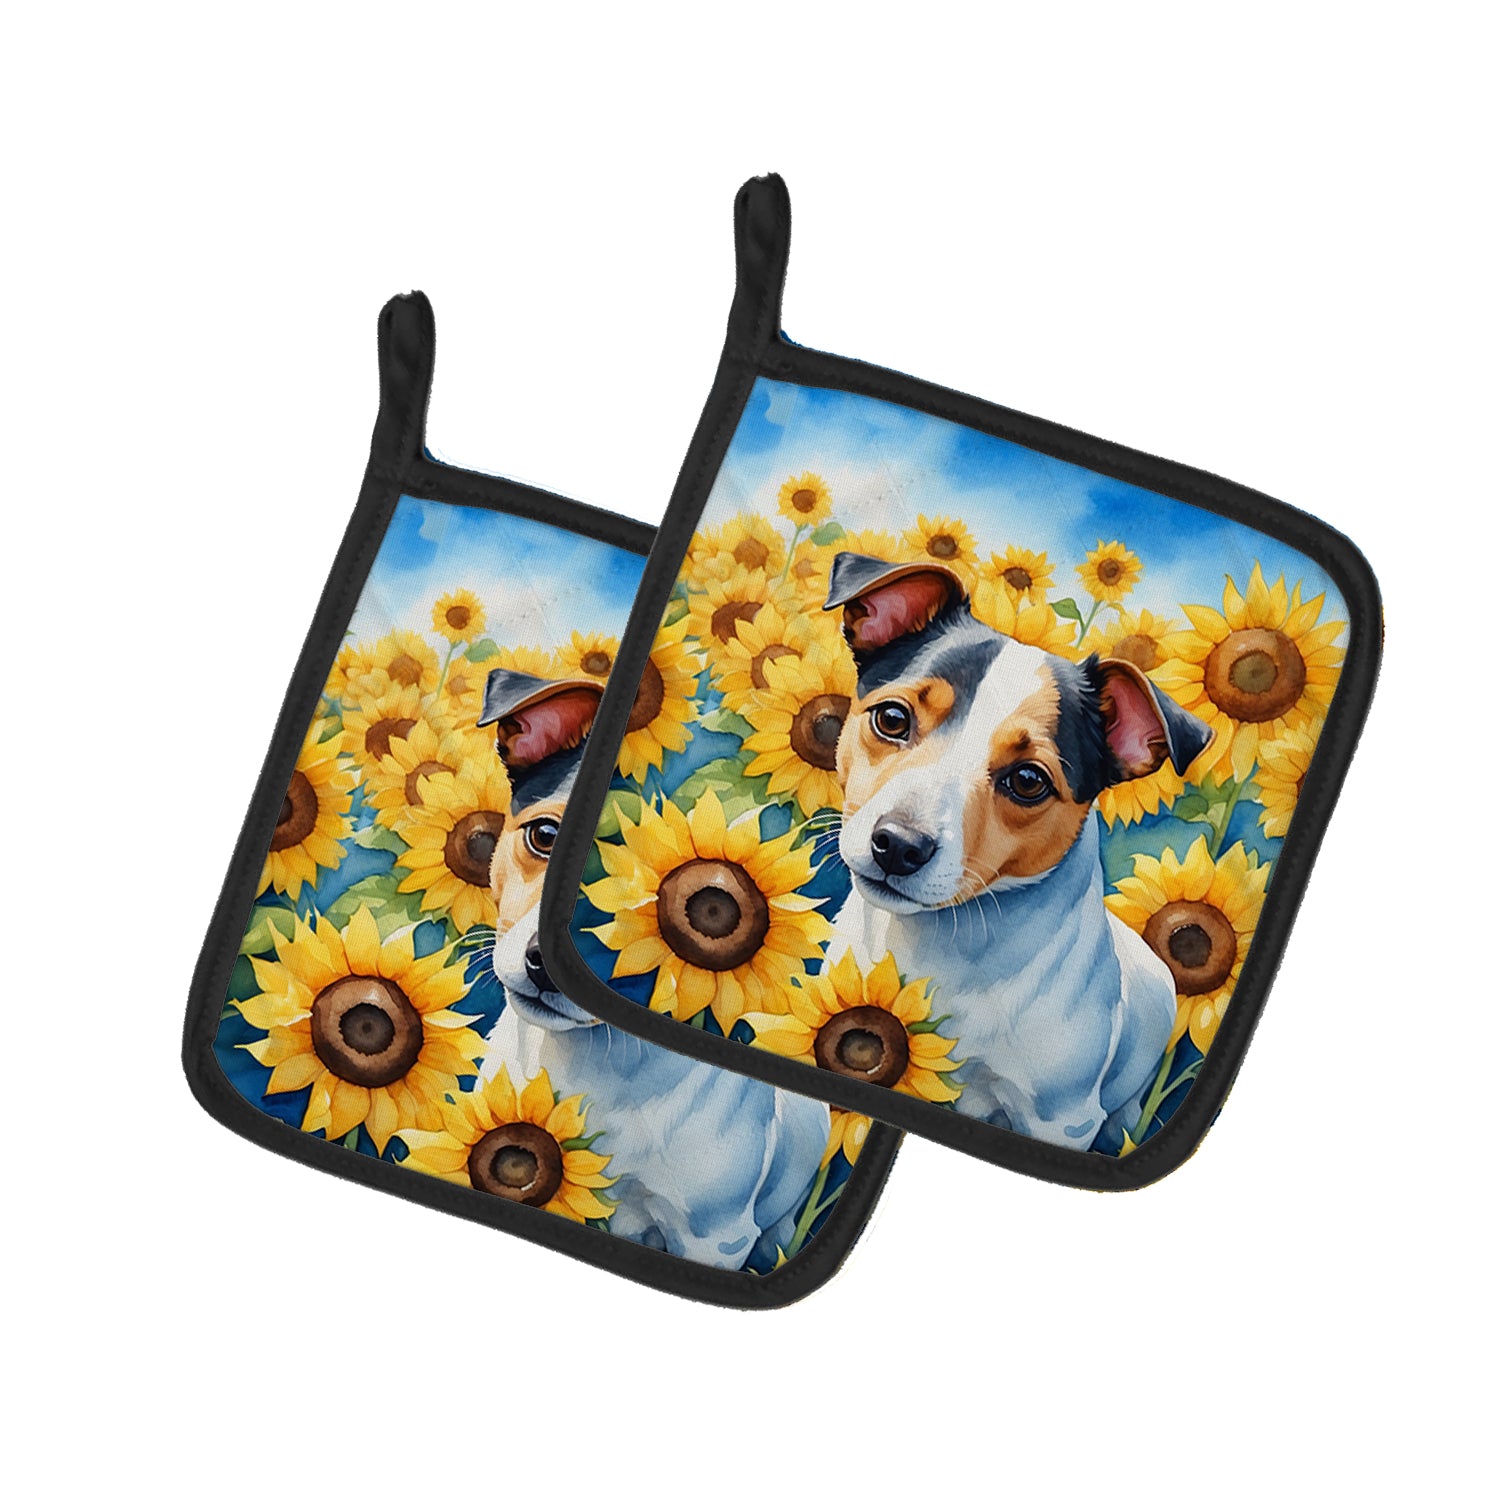 Buy this Jack Russell Terrier in Sunflowers Pair of Pot Holders